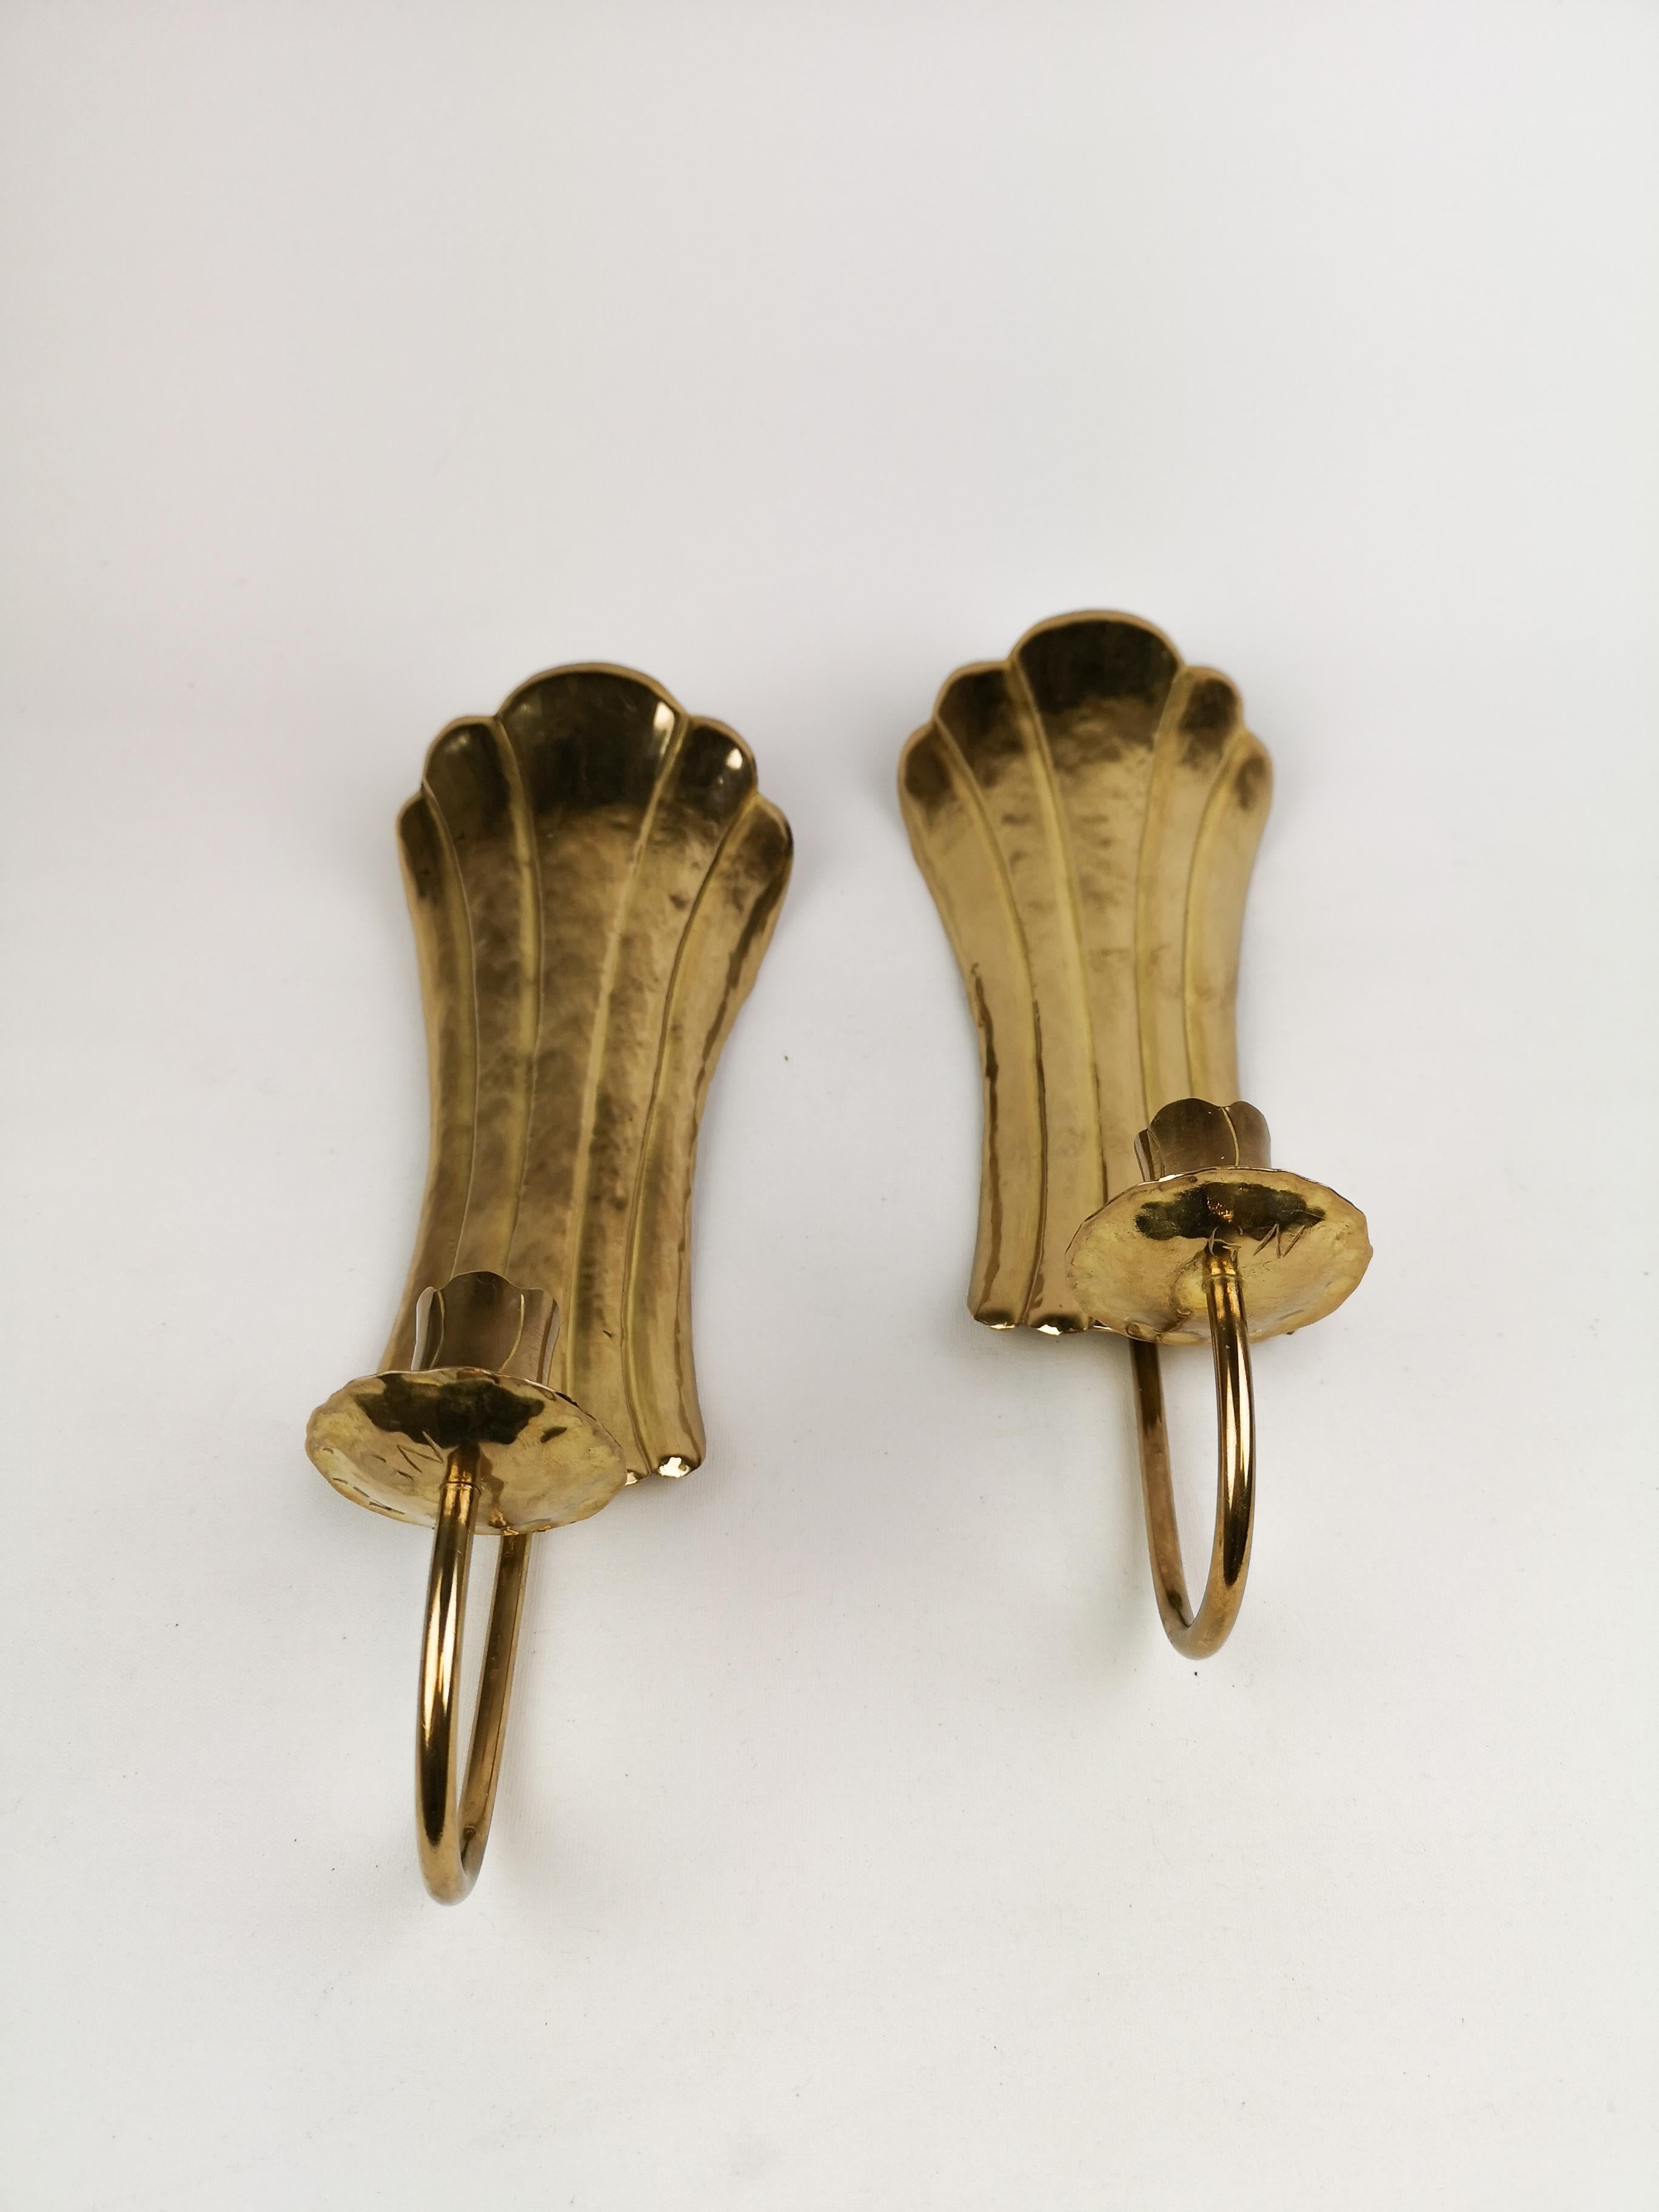 These wall candlesticks was hand sculpted in Arvika, Sweden. They are in the same shape and form as the candlesticks made in brass by famous Holmström Arvika, these ones has the initial of G.N.
Gives a nice shine when a candle is lit.

Nice